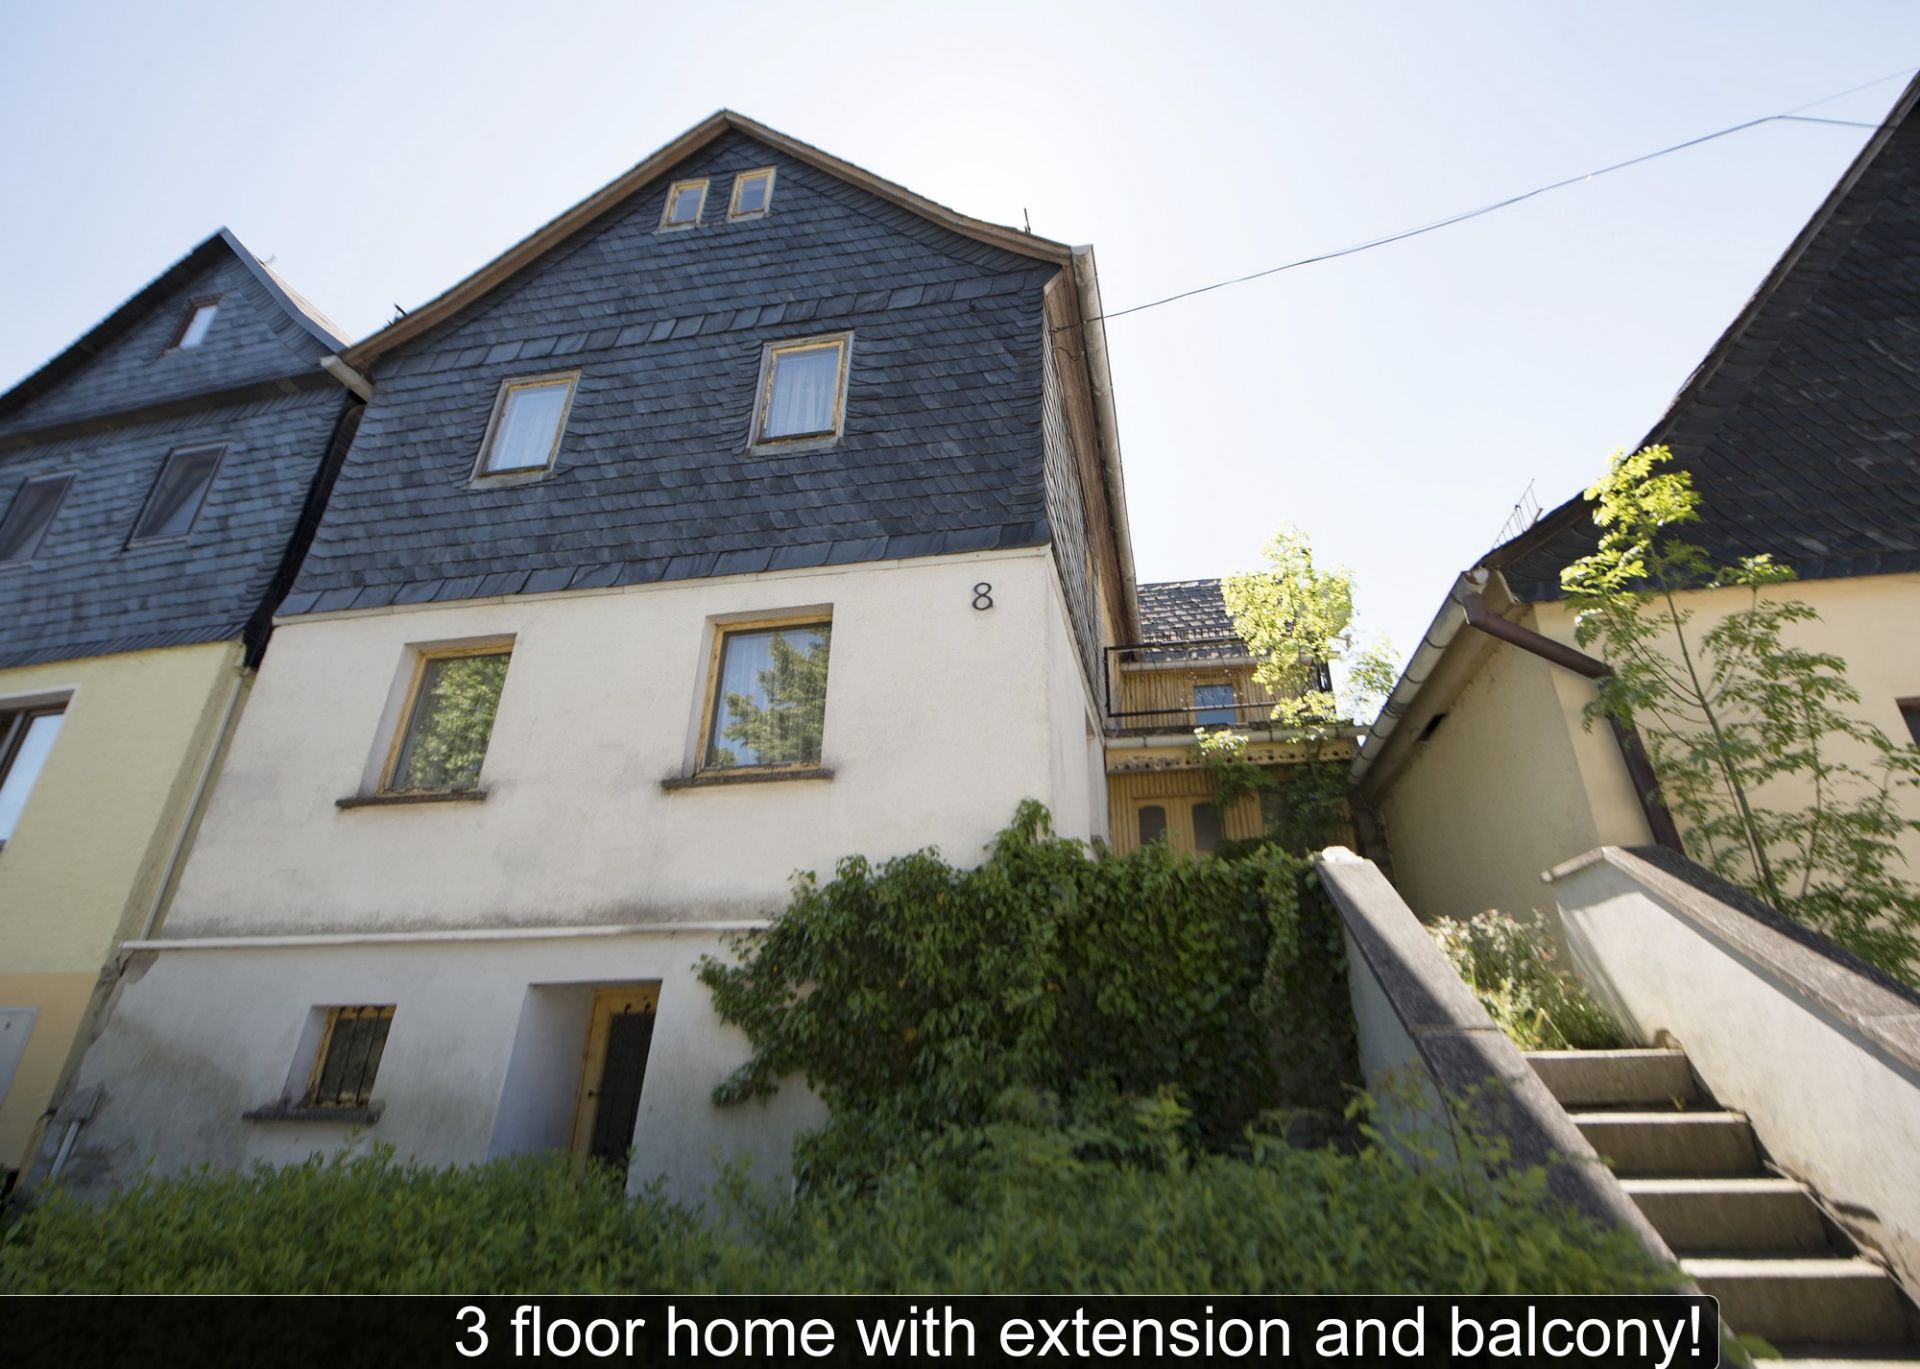 STUNNING 4 BEDROOM PROPERTY IN WURZBACH, GERMANY